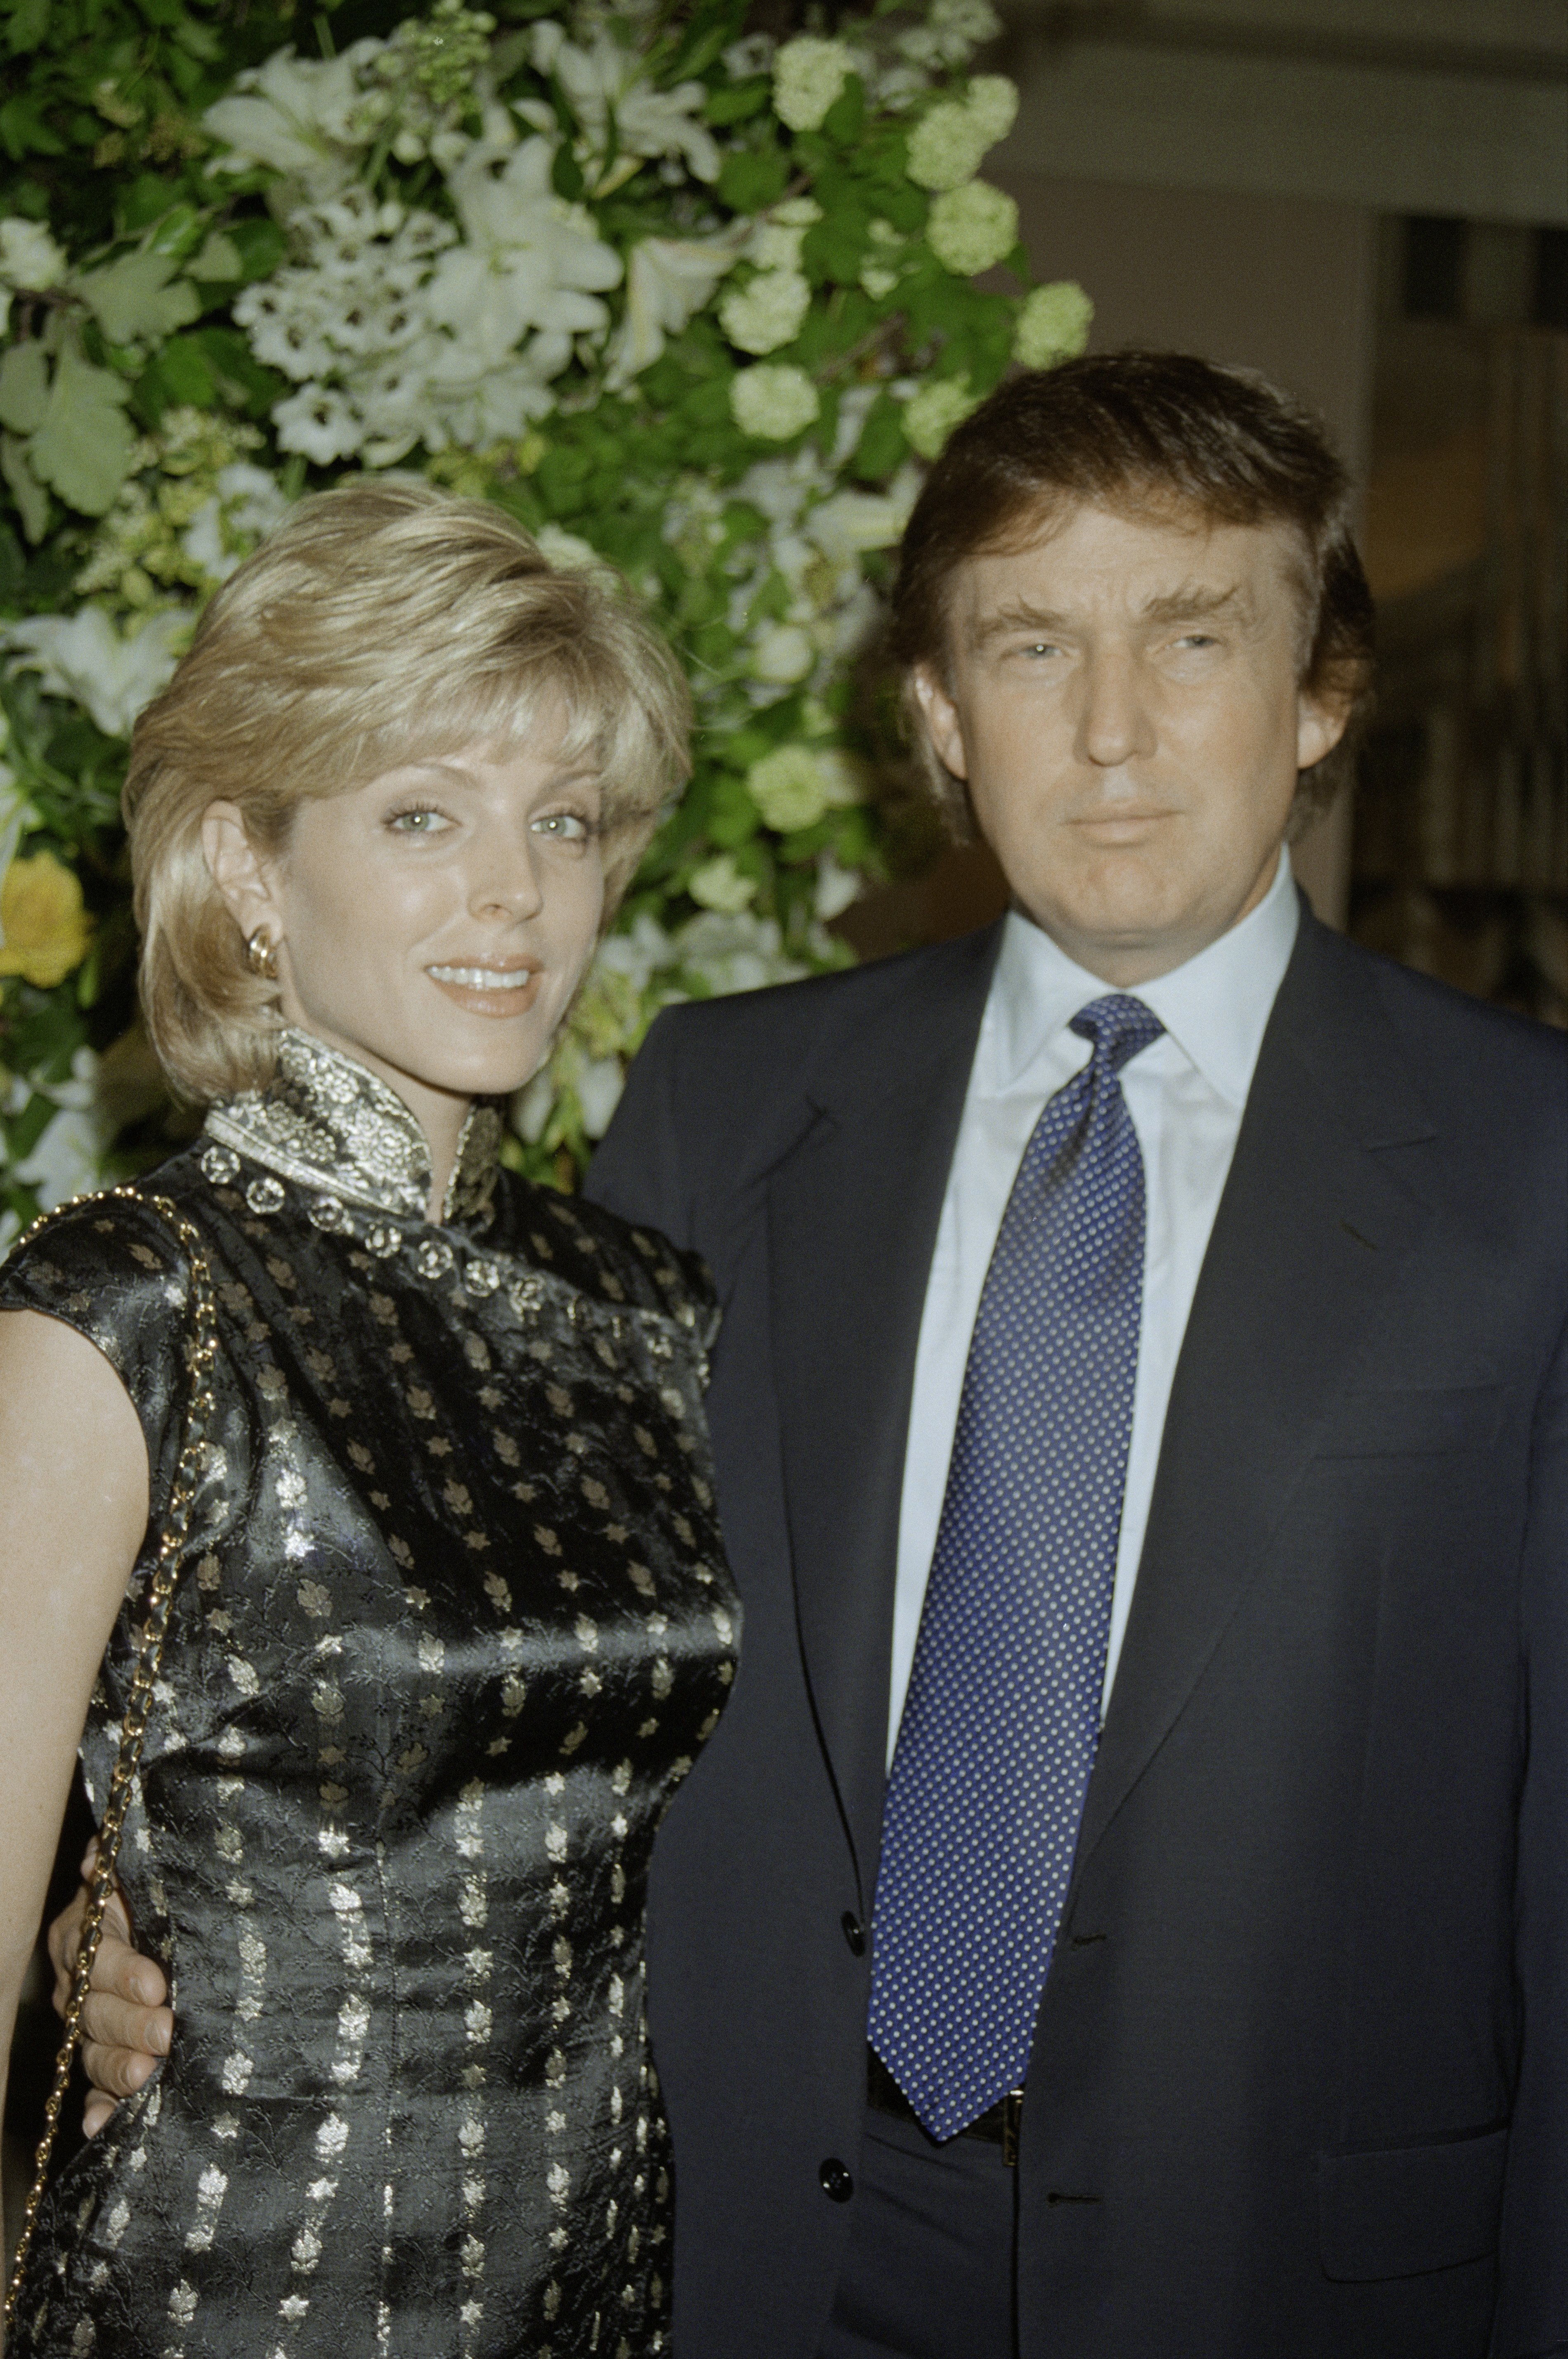 Donald Trump with his second wife, Marla Maples, at Claridge's hotel, London, to host a launch event for his New York hotel, the Trump International Hotel and Tower, 4th June 1996 | Photo: GettyImages